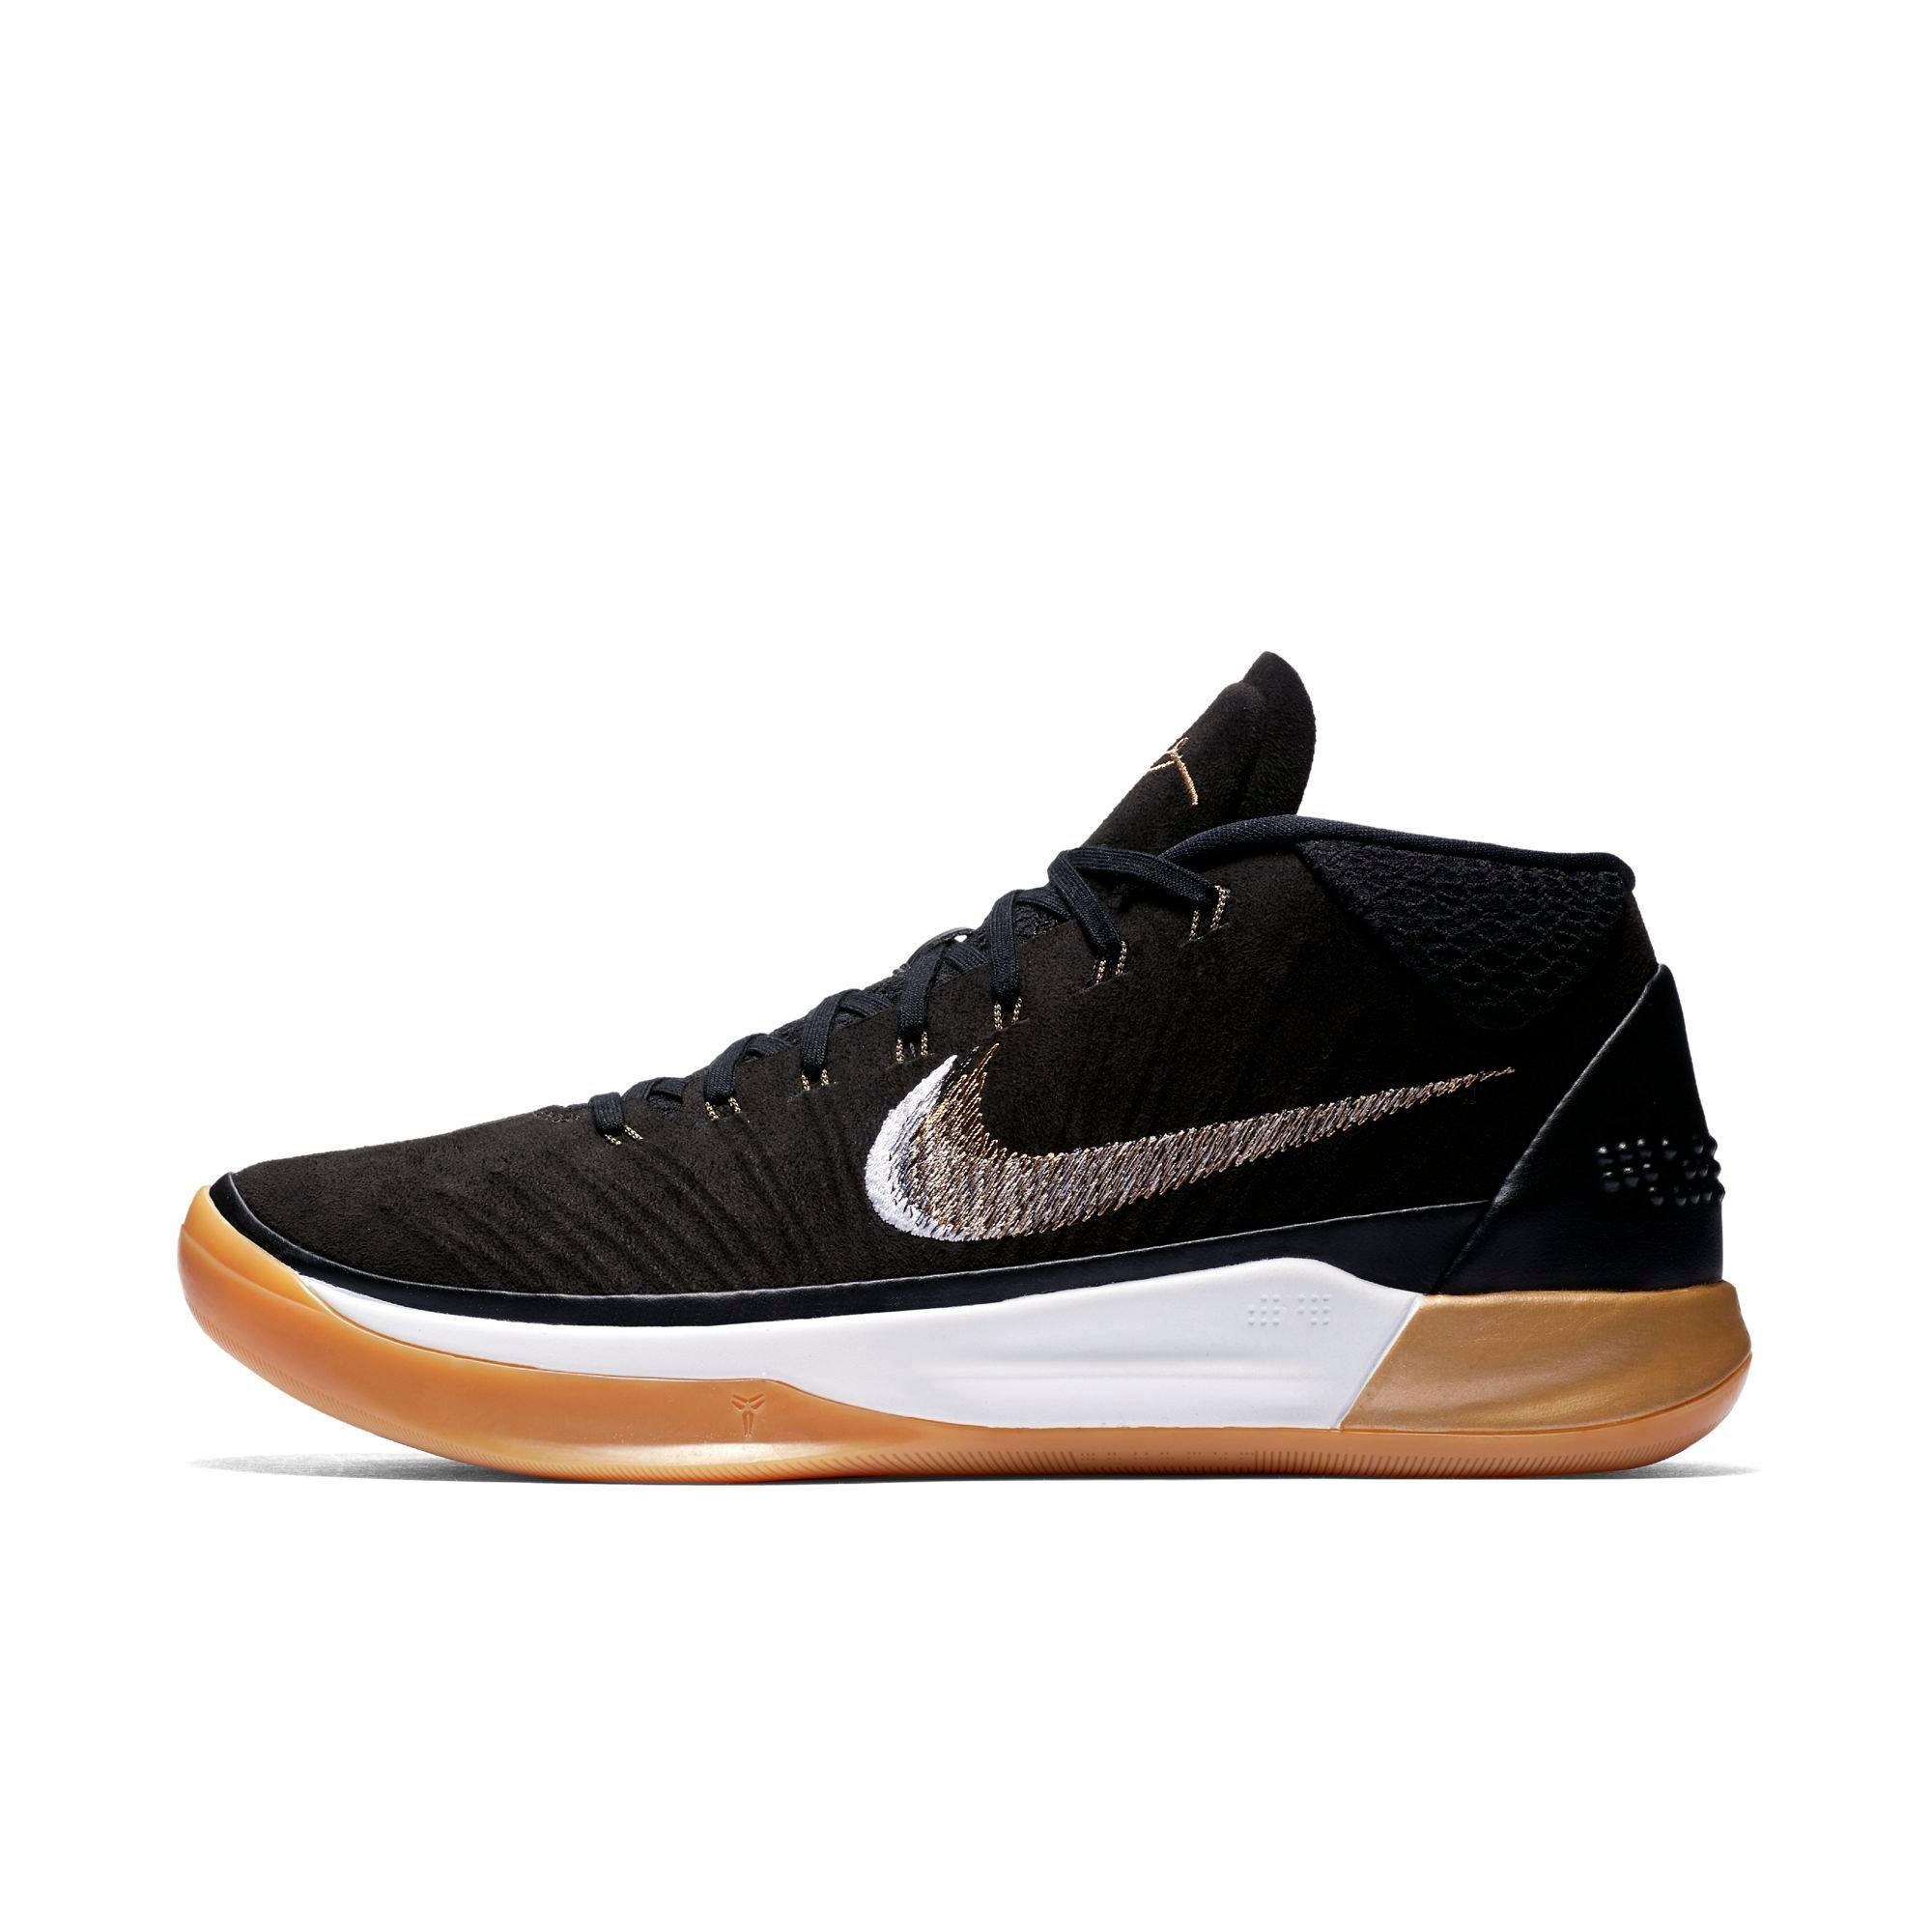 kobe shoes black and gold